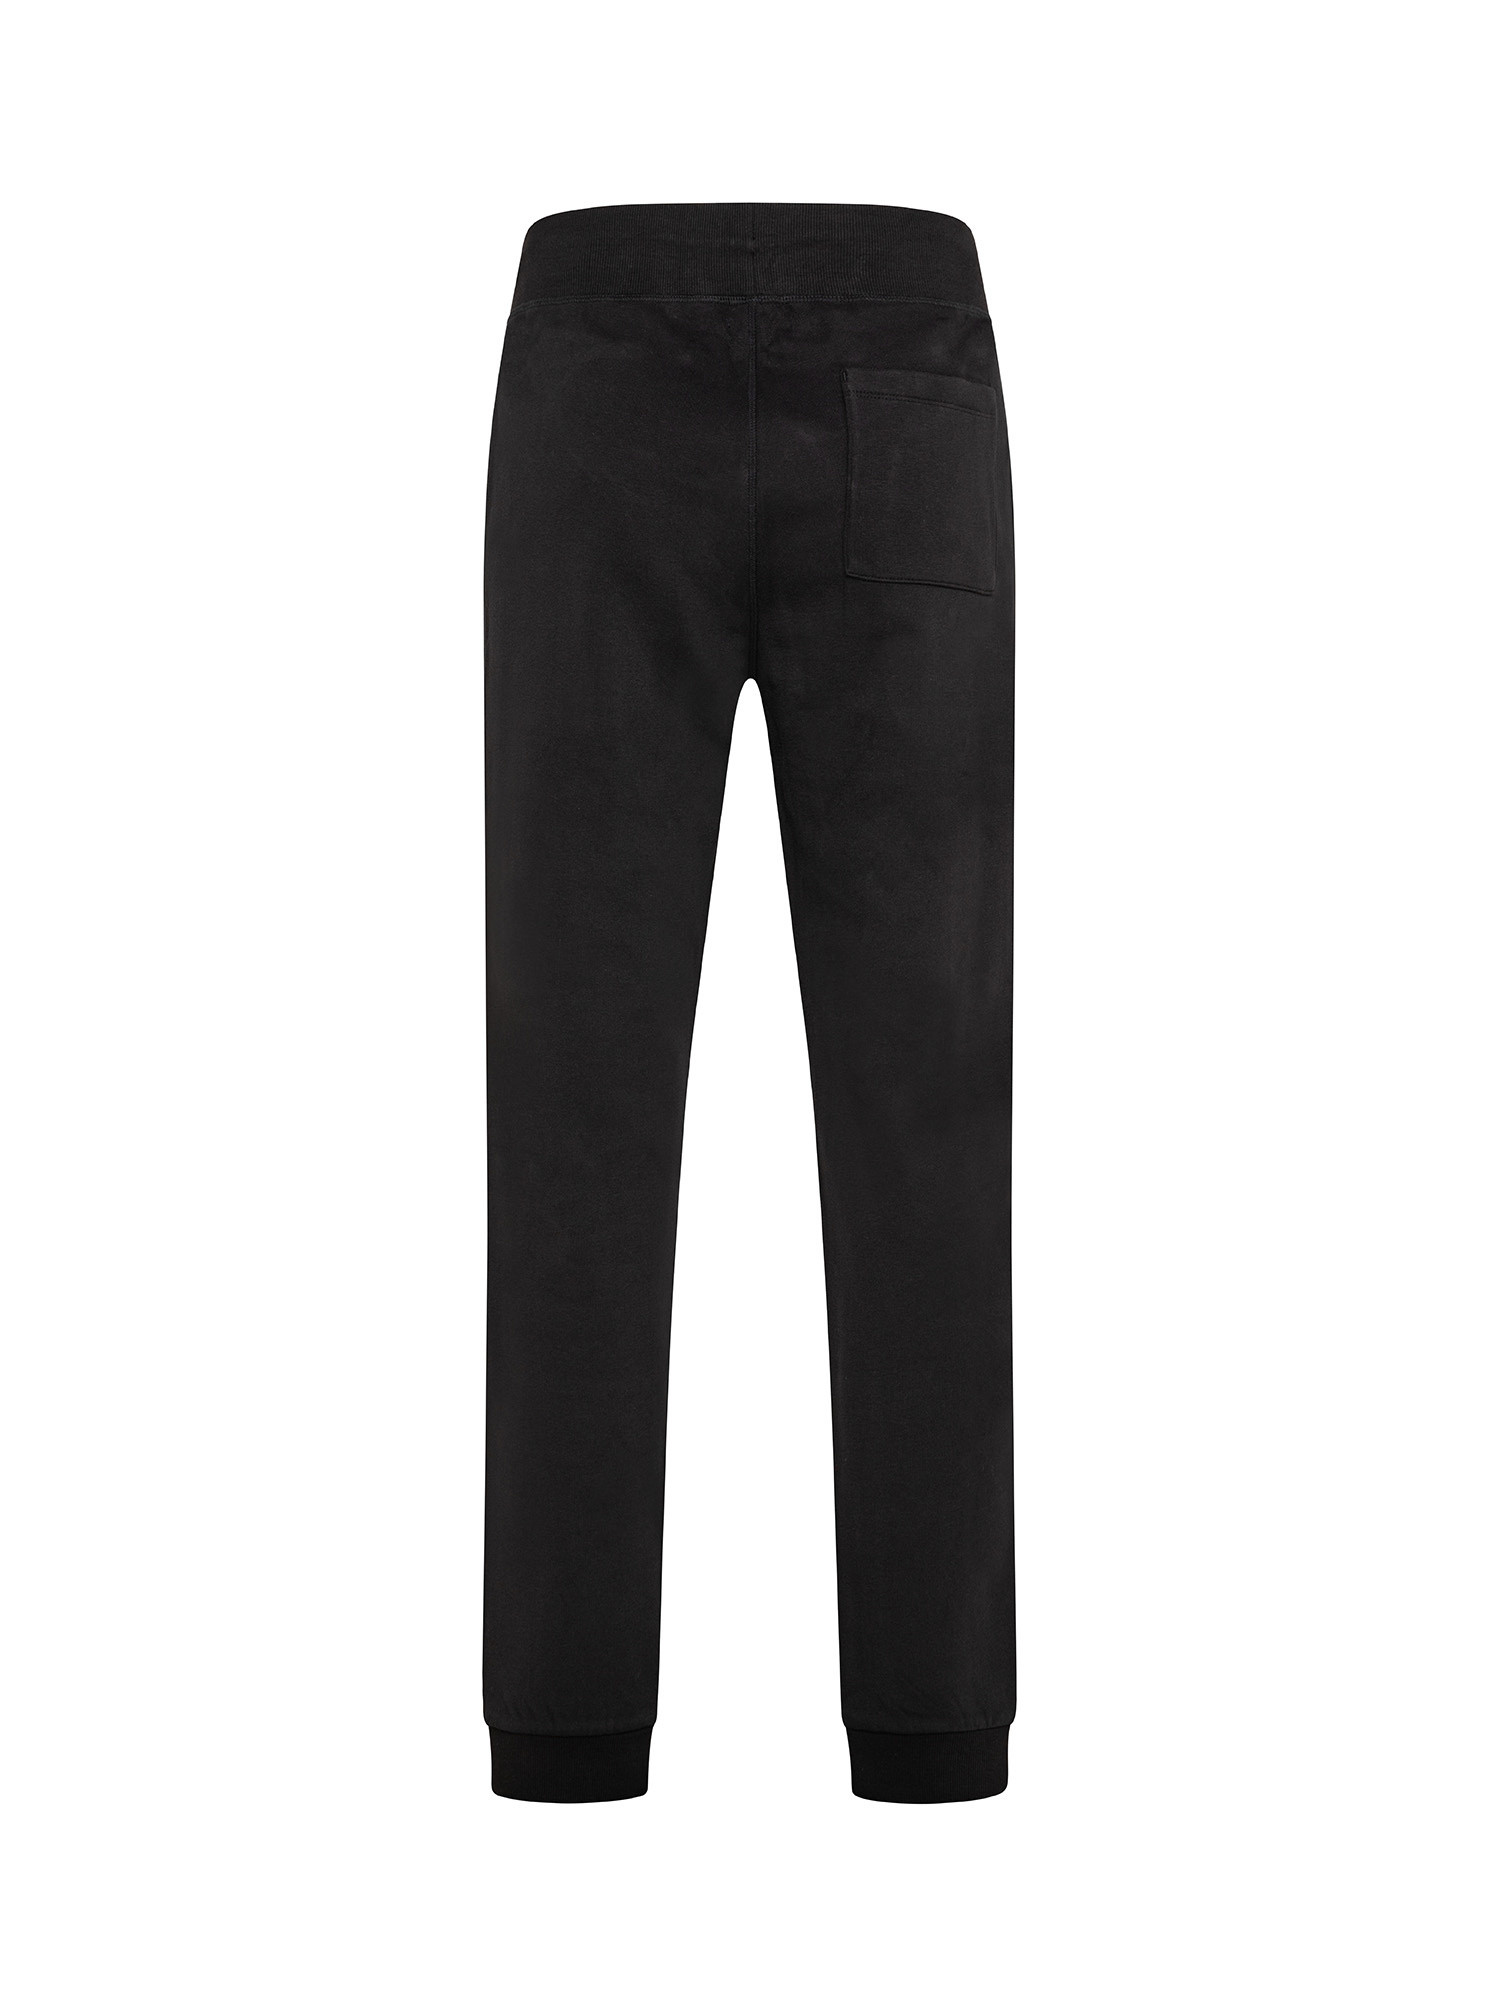 JCT - Soft touch five-pocket trousers, Black, large image number 1